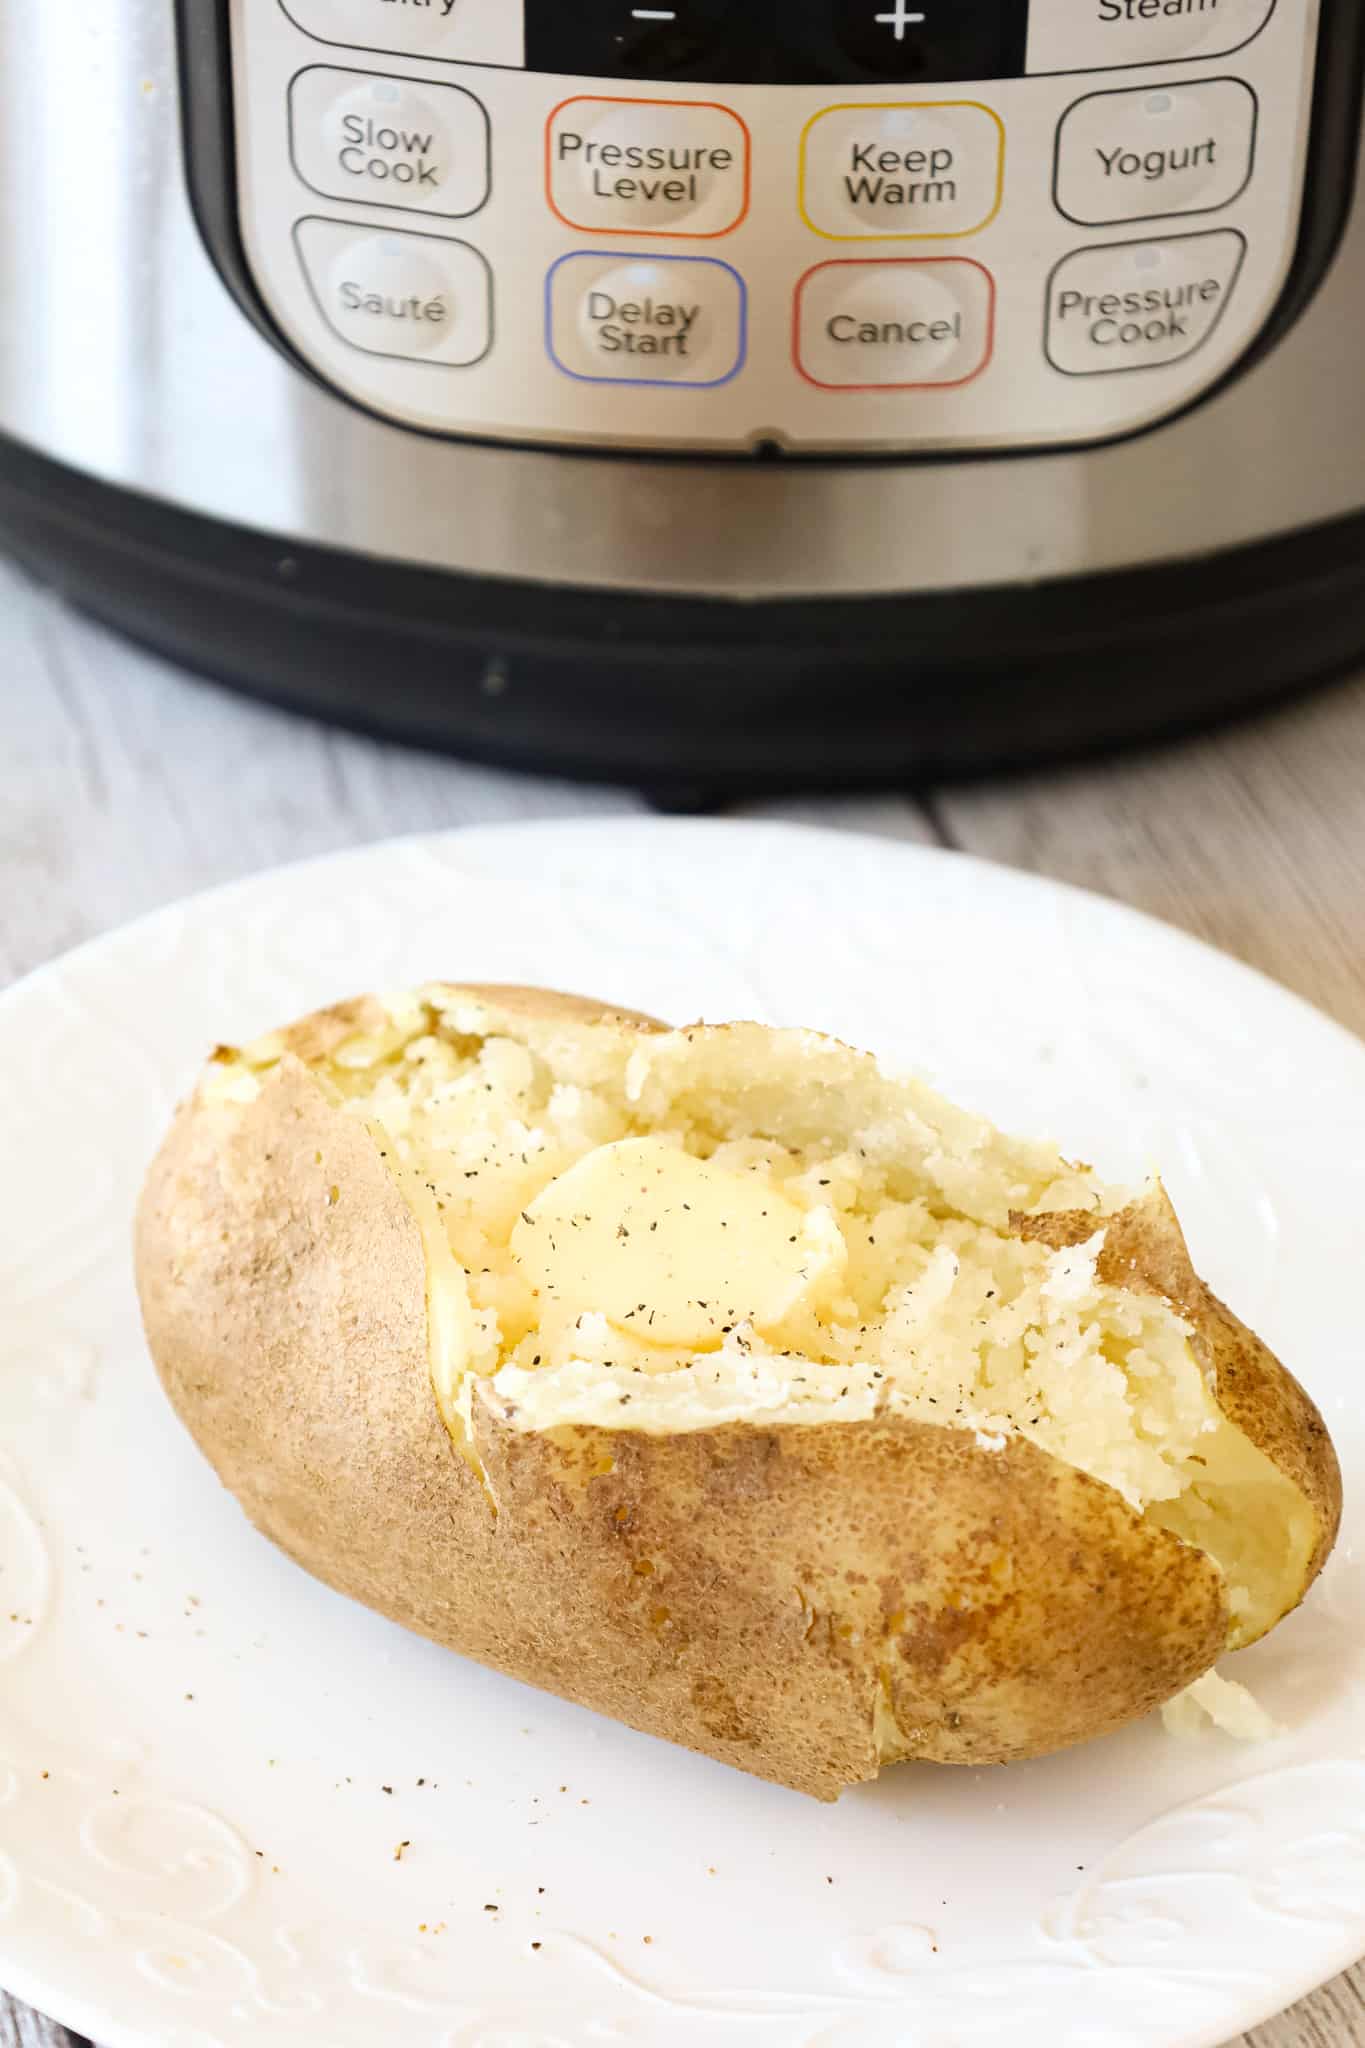 Instant Pot Baked Potatoes are a simple and delicious side dish recipe that can be topped with a variety of garnishes including butter, chives, sour cream, shredded cheese and crumbled bacon.